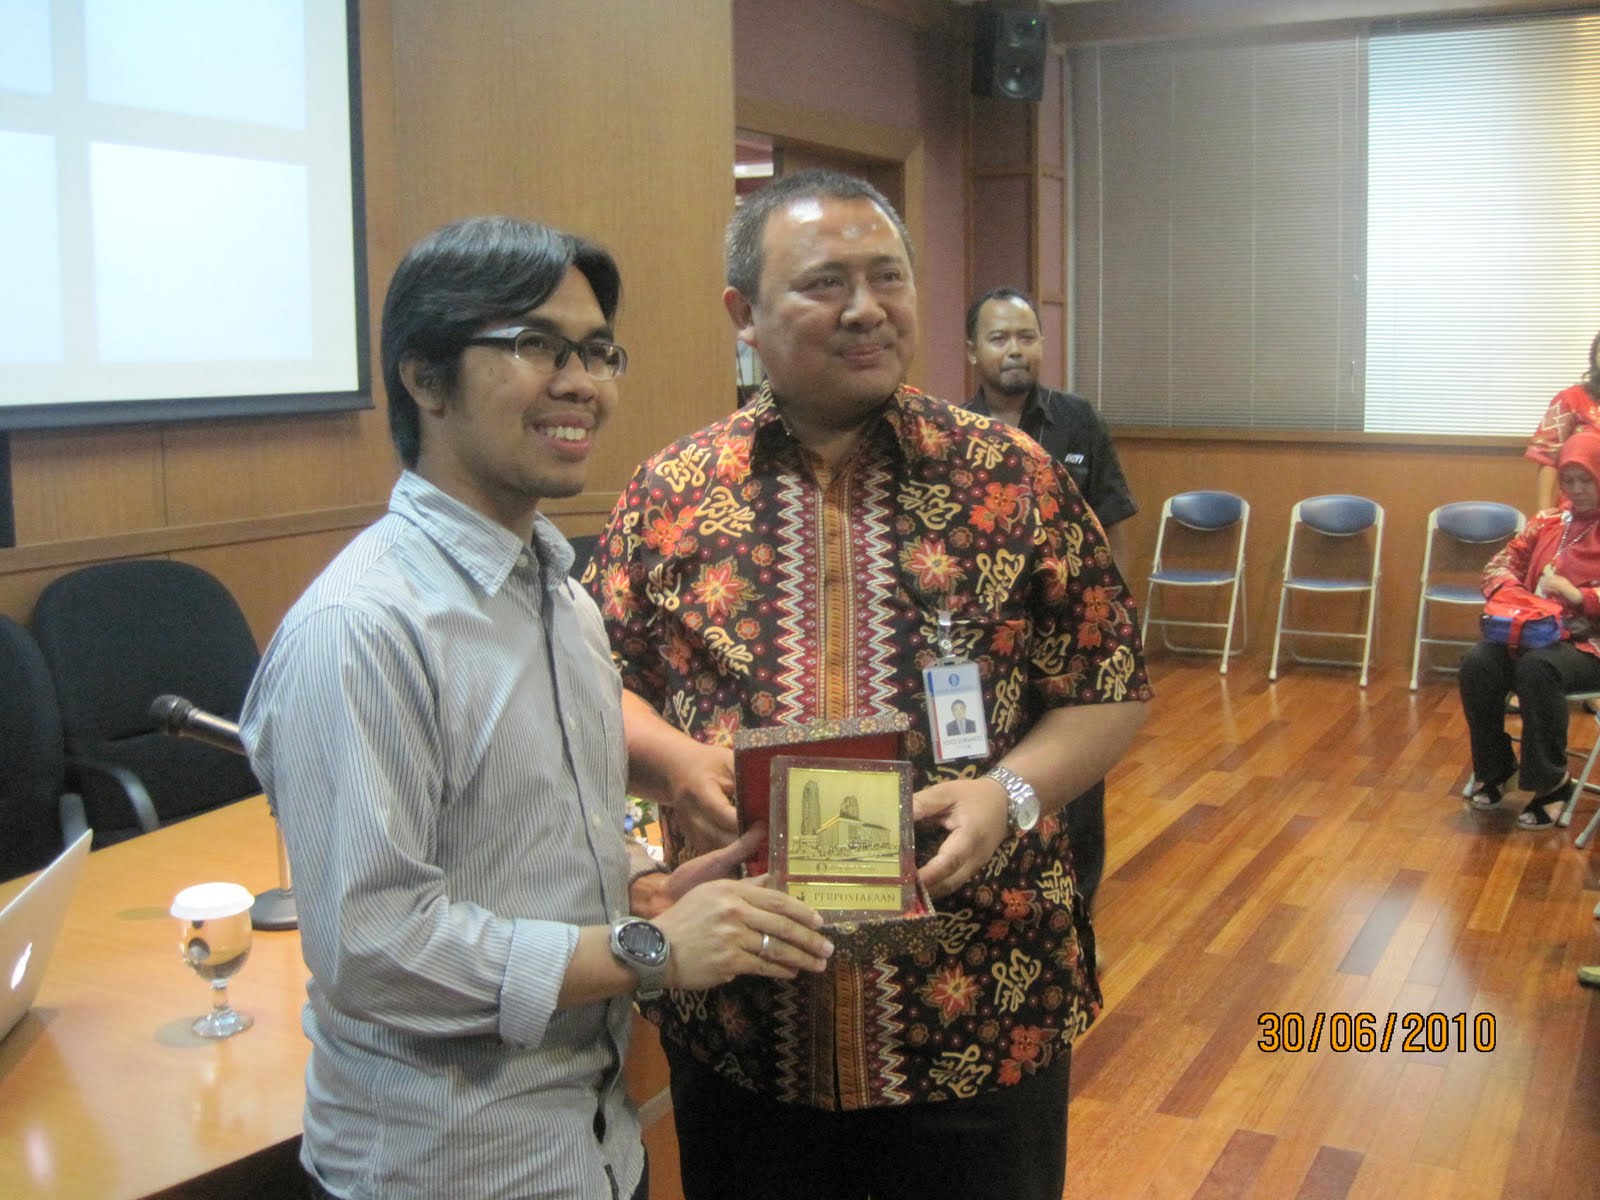 Change Management and Leadership for Indonesia: Ahmad Fuadi